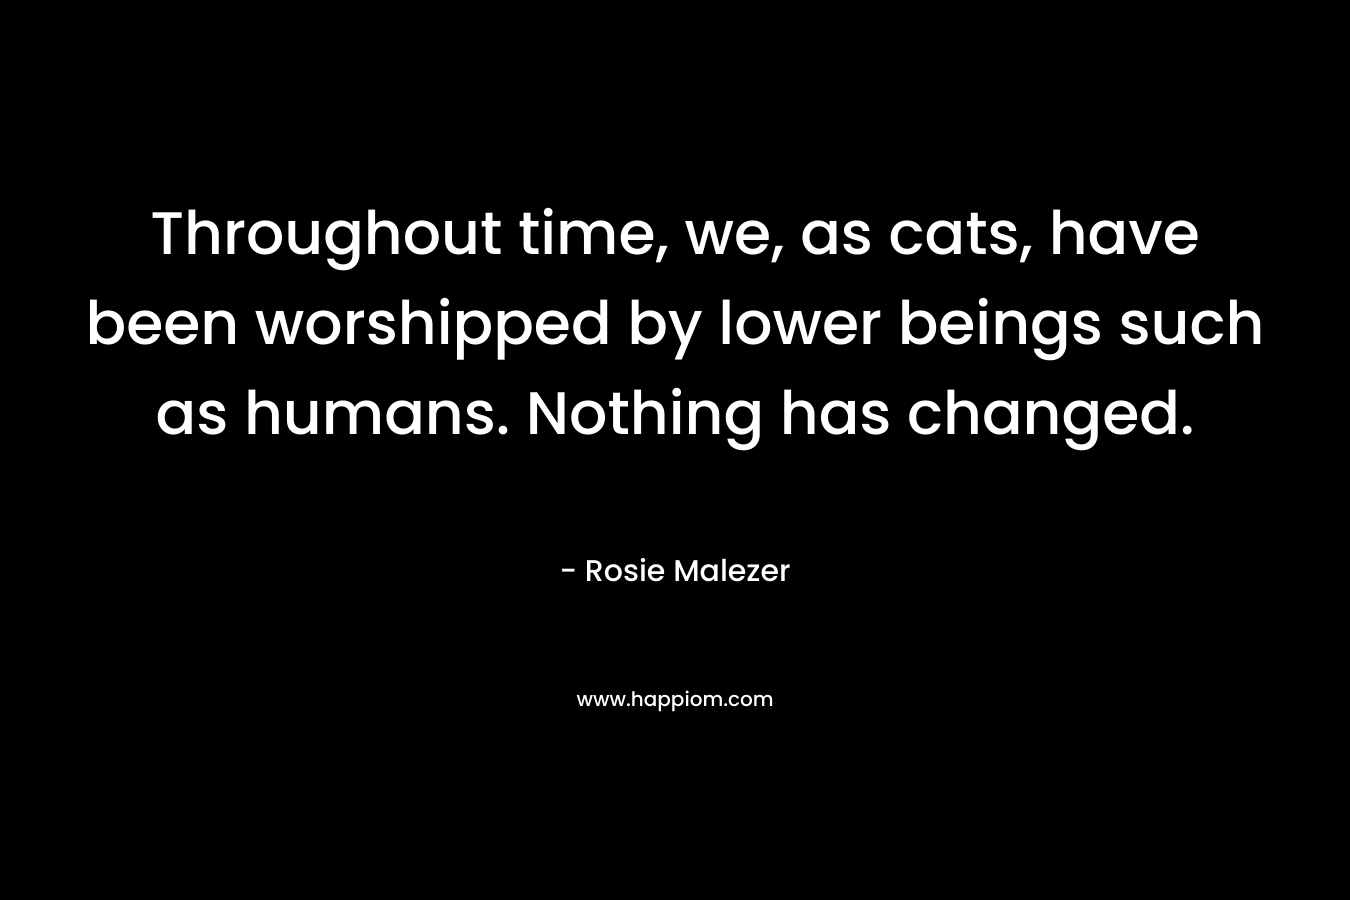 Throughout time, we, as cats, have been worshipped by lower beings such as humans. Nothing has changed. – Rosie Malezer